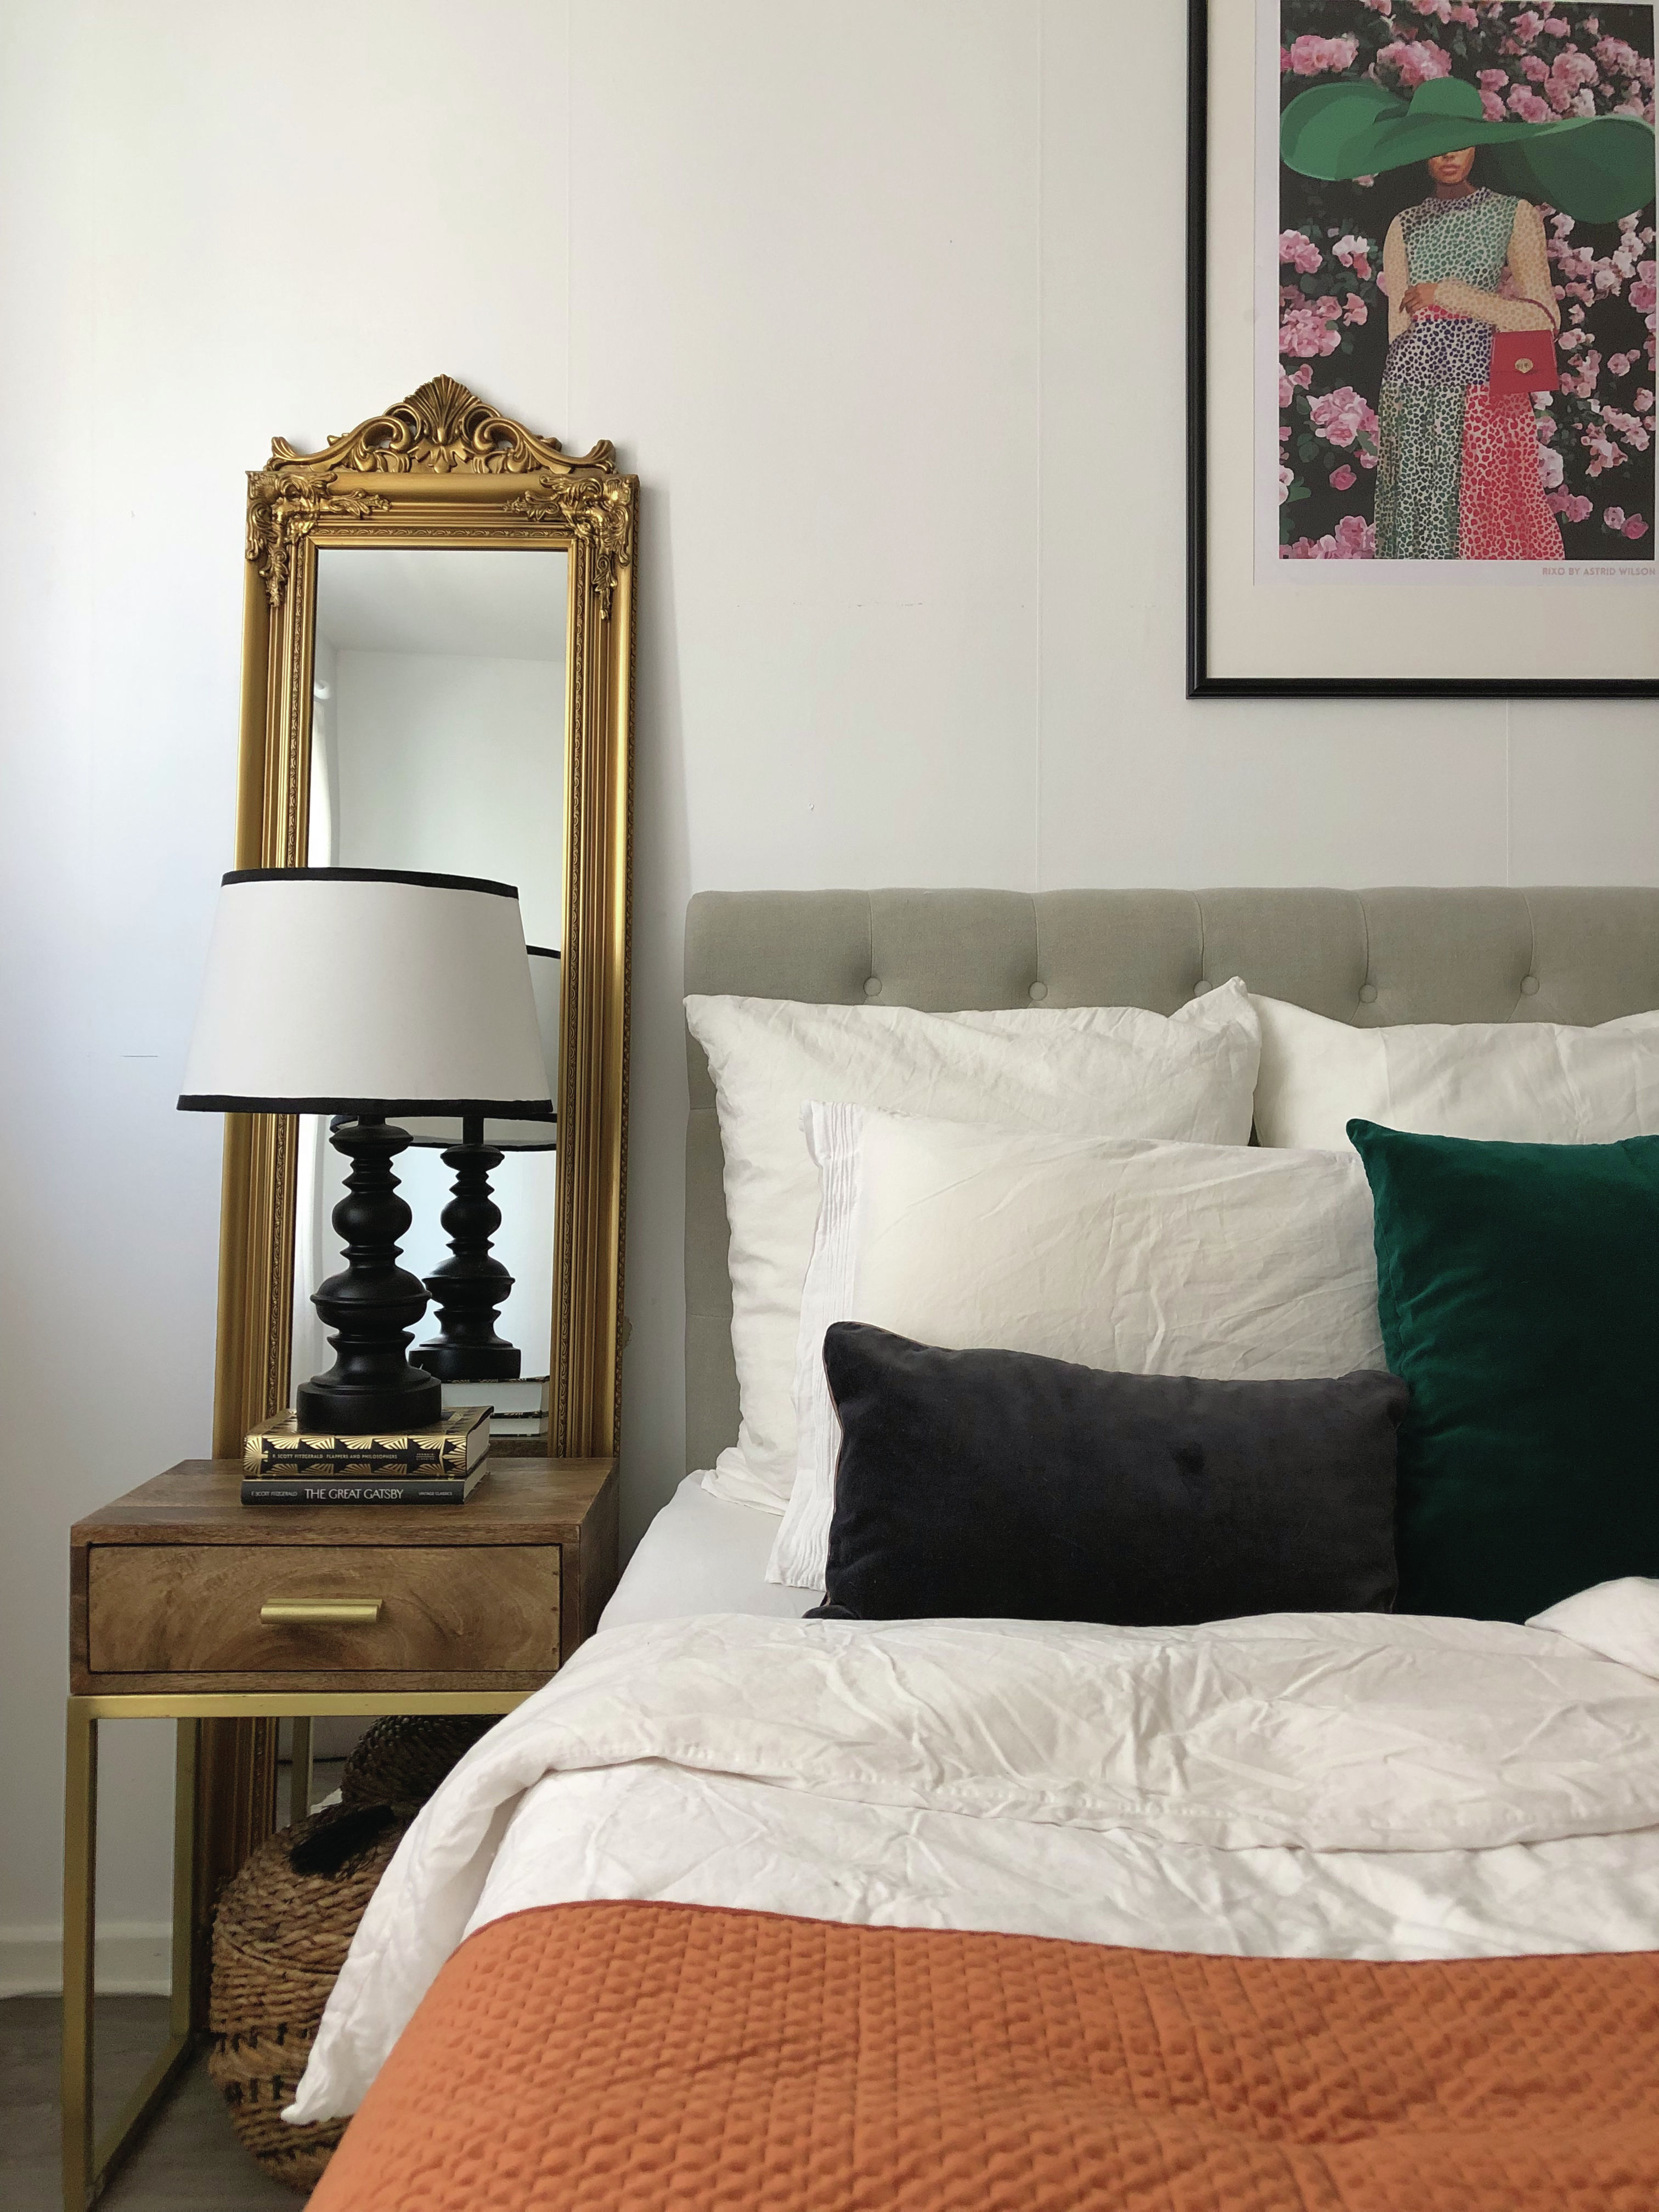 A grey bedroom with gold mirror, cream and black lampshade and framed wall art of woman